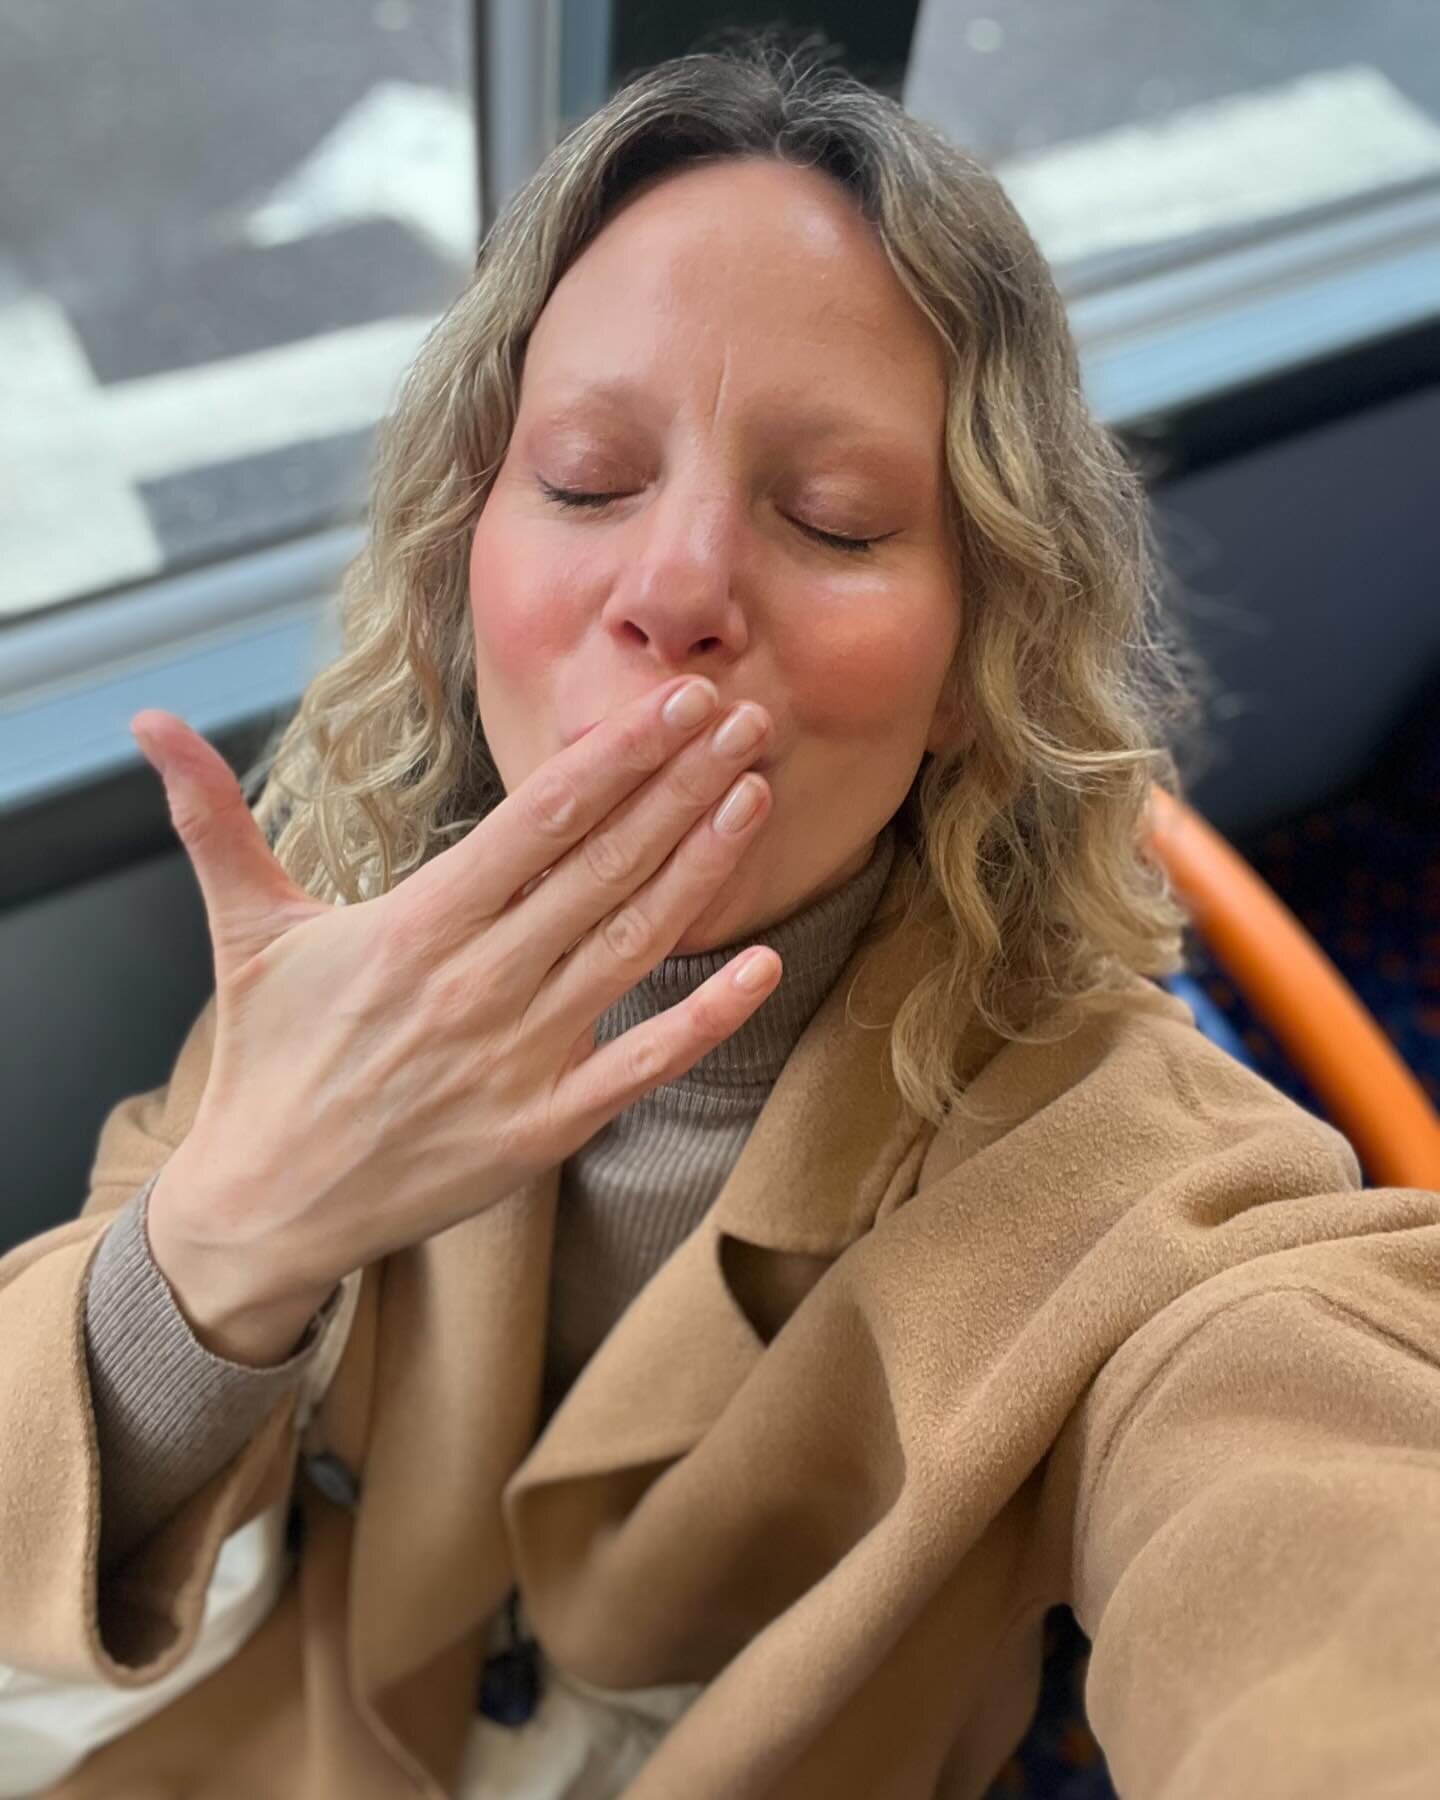 This is kisses from the bus just a little while ago this morning! Just arrived at @st_ethelburgas for the second Transformation of the Heart Saturday together with the group in person!
.
Heart has awoken a little recently and this morning is one of t